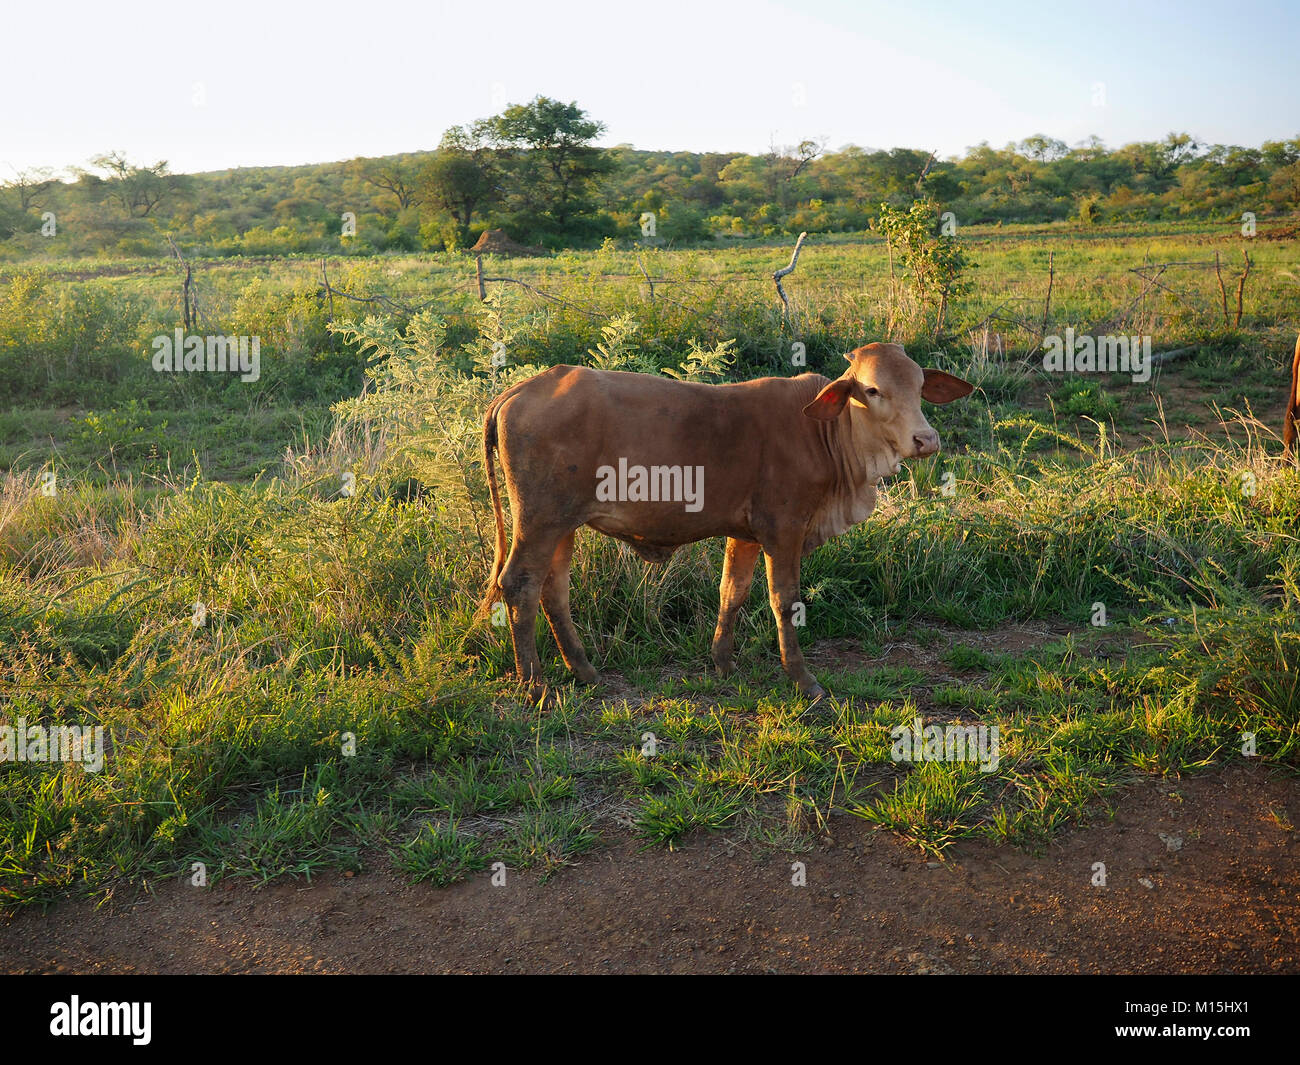 Domestic cow by the side of the road in Zimbabwe Stock Photo